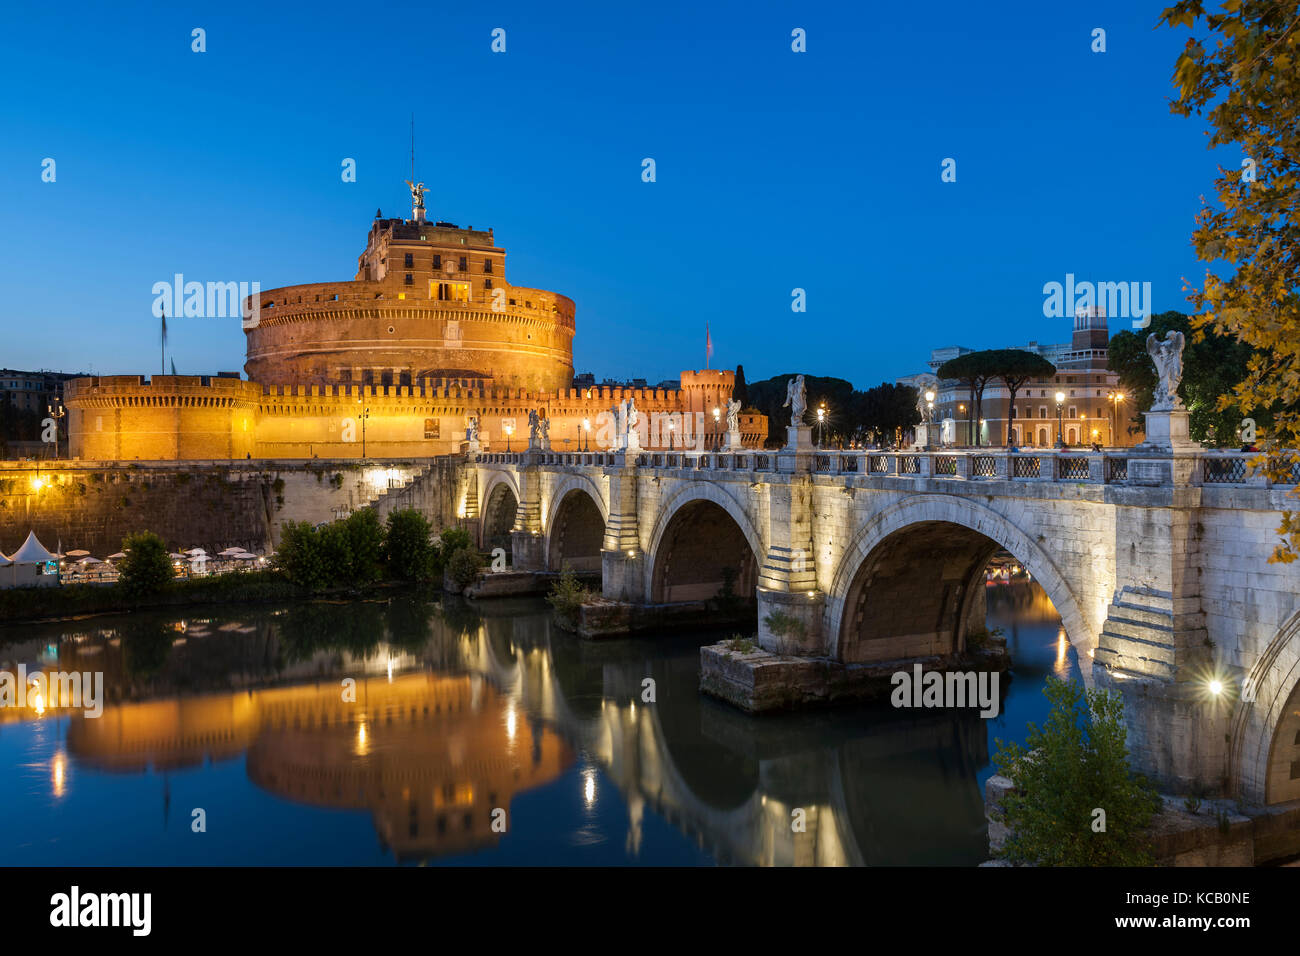 The Mausoleum of Hadrian (aka Castel Sant'Angelo) and the Tiber river in Rome at dusk. Stock Photo